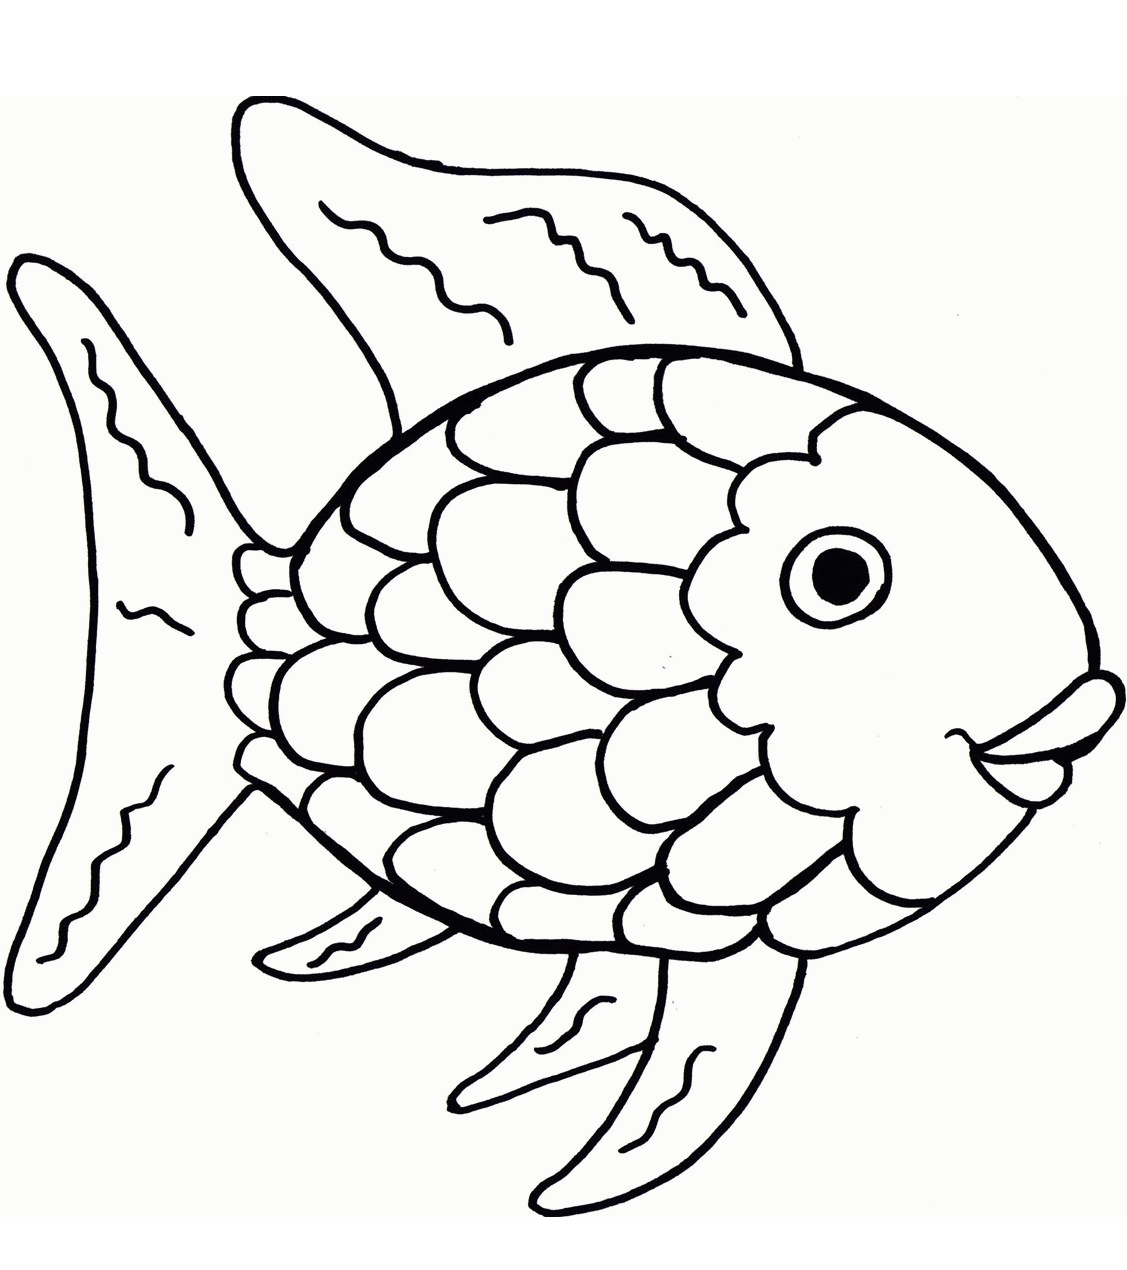 The Rainbow Fish Coloring Page Free Printable Coloring Pages for Kids